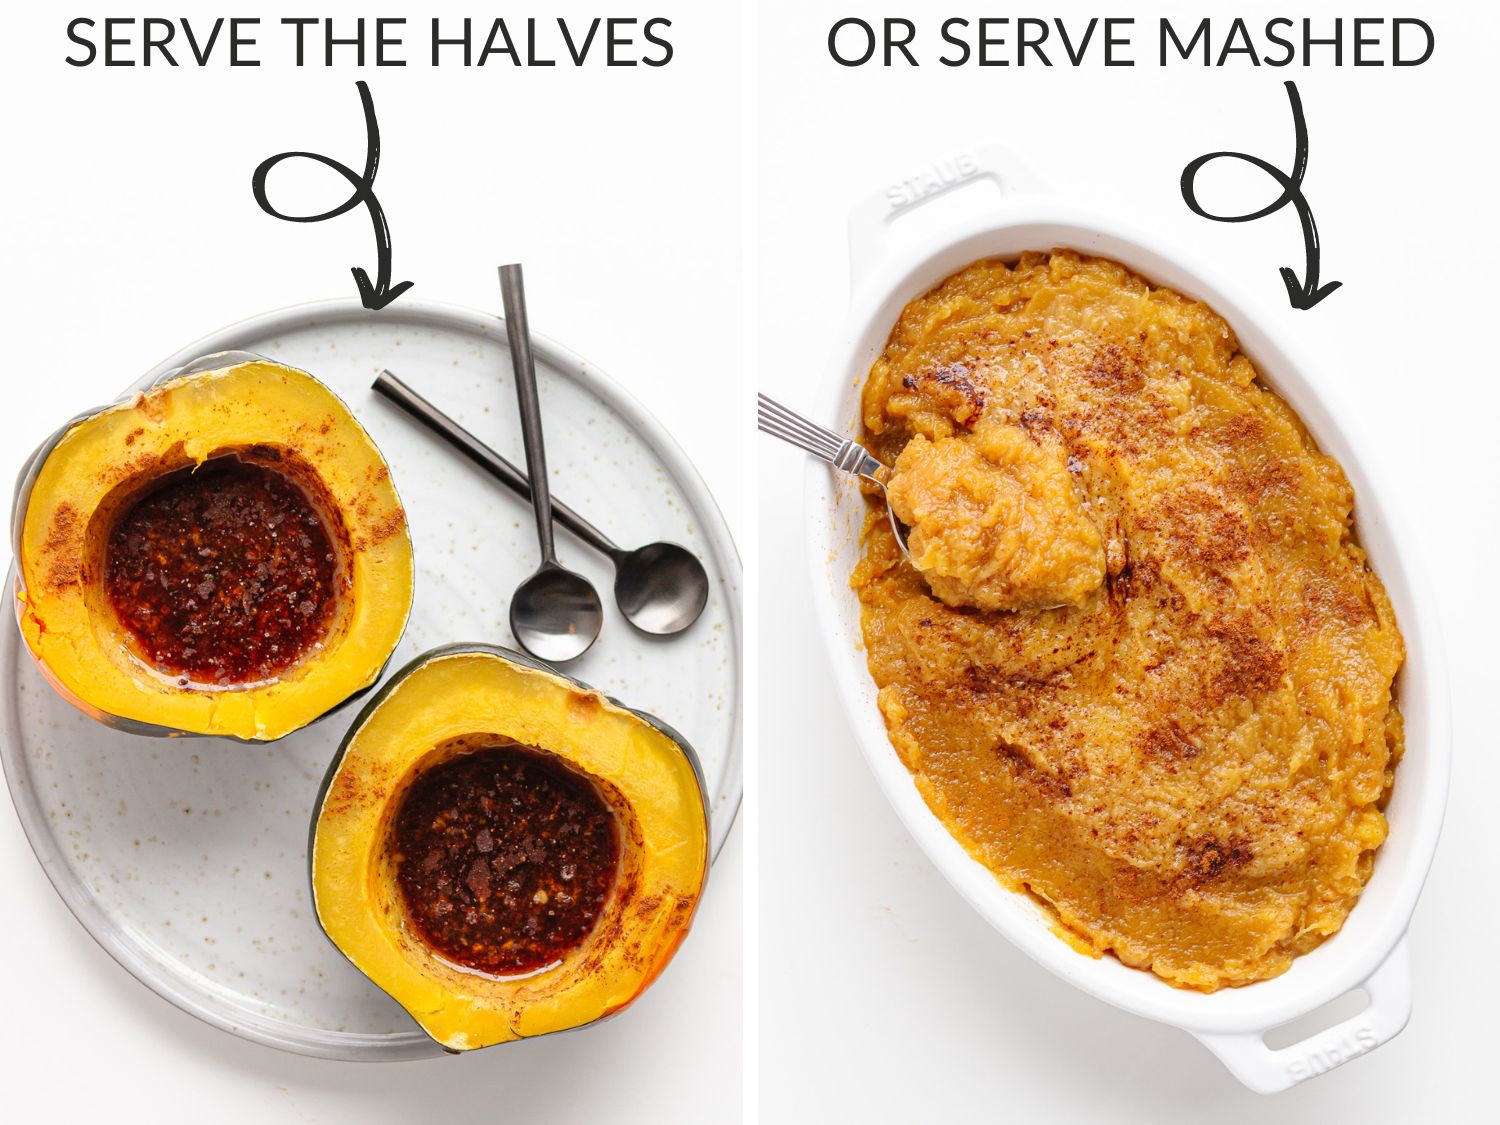 Graphic showing two different ways to serve Instant Pot acorn squash: serve the halves or serve mashed.